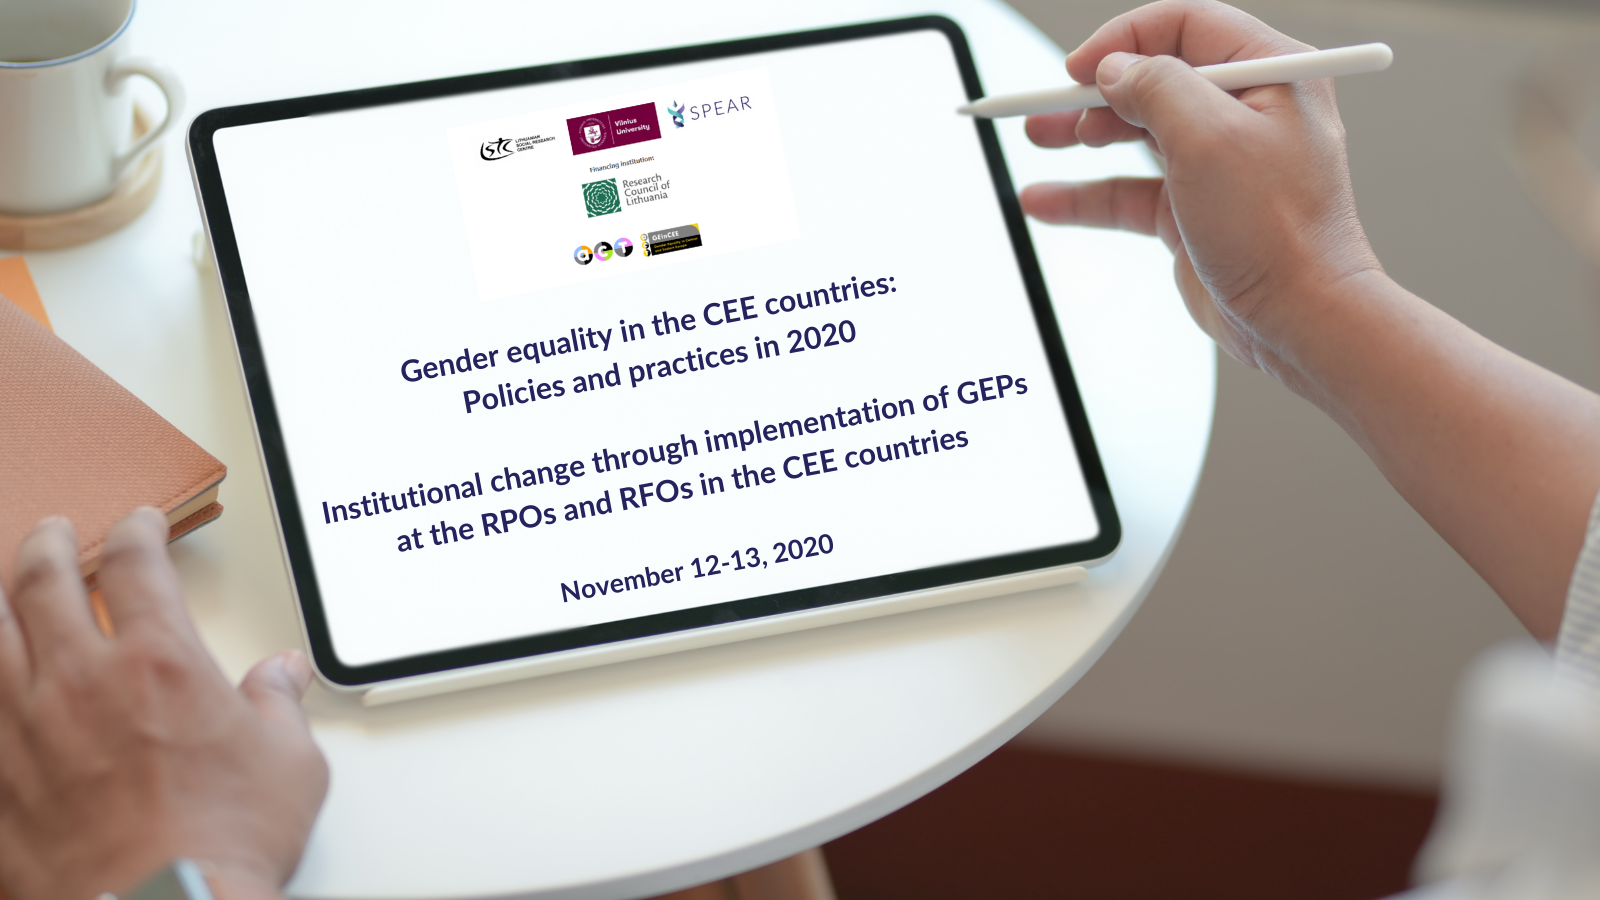 Gender equality in CEE countries: Policies and practices 2020 Institutional change through implementation of GEPs at the RPOs and RFOs in the CEE countries